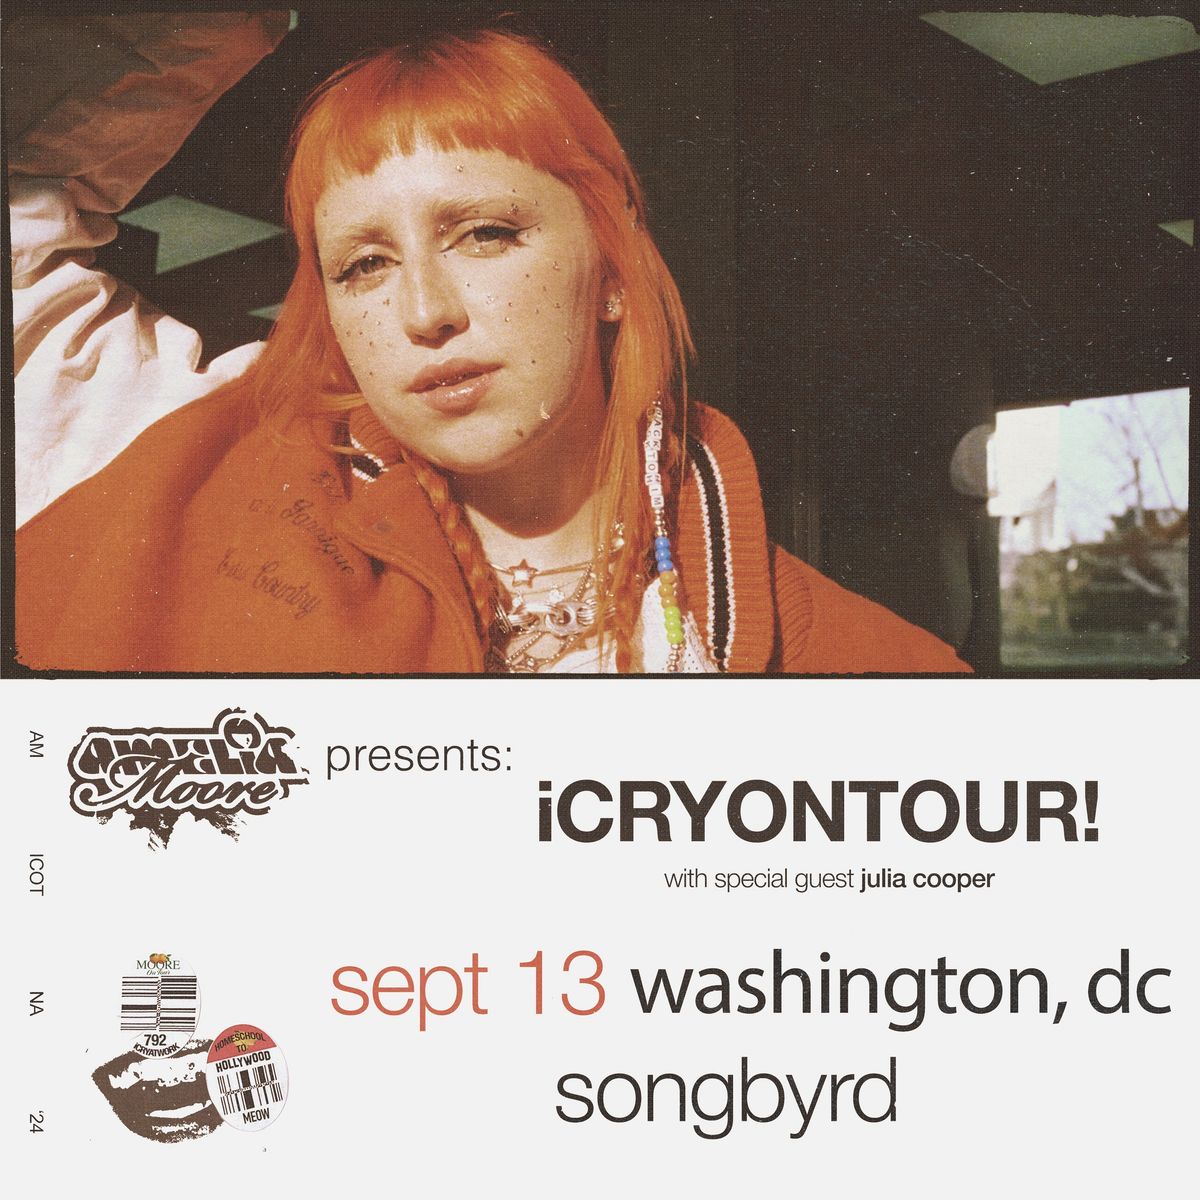 Amelia Moore presents: iCRYONTOUR! at Songbyrd DC